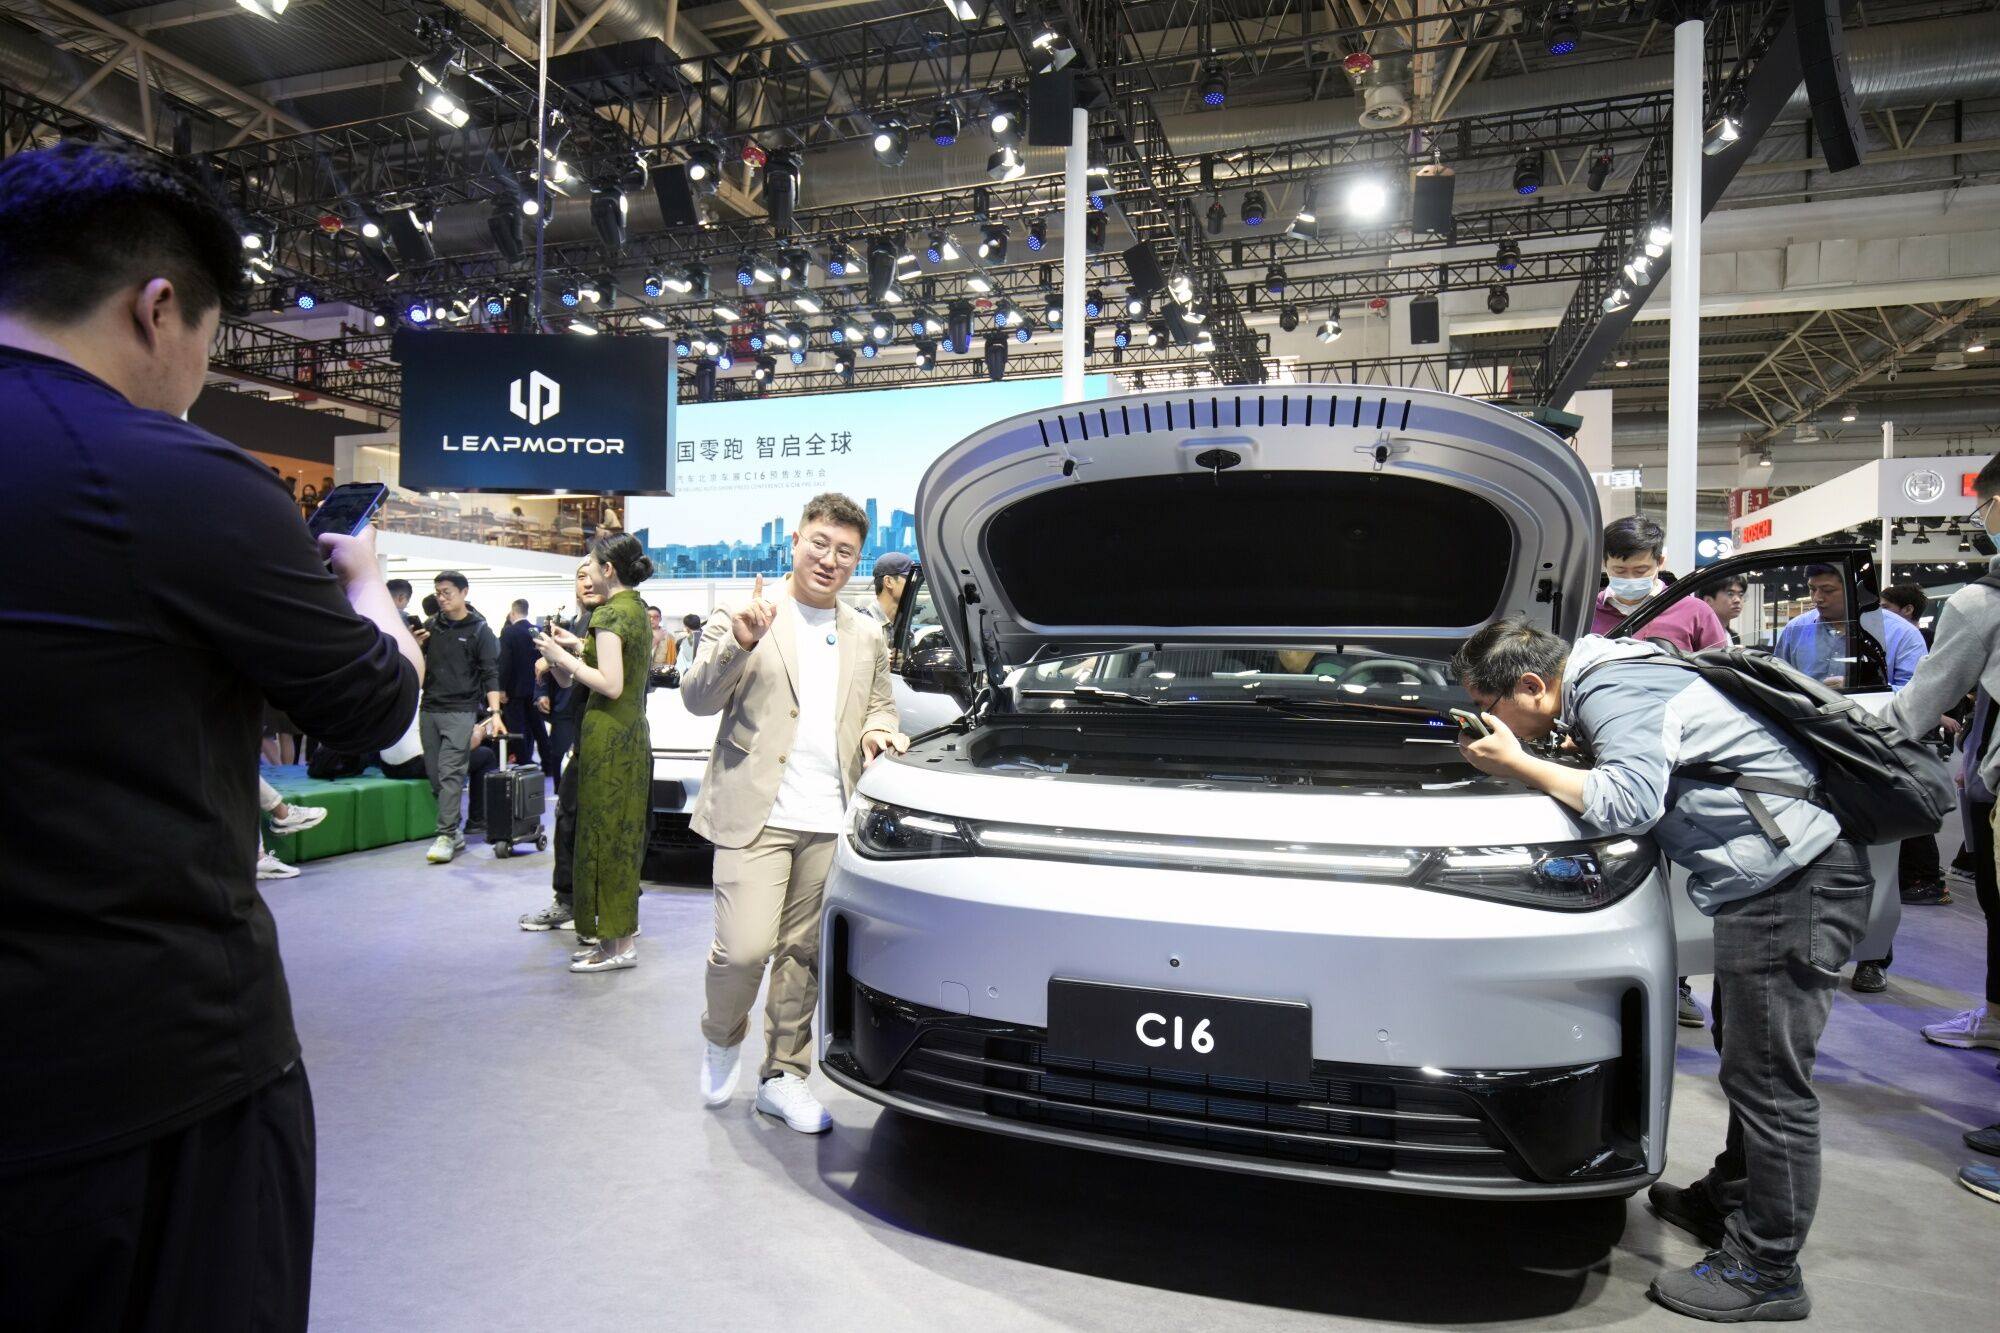 A Leapmotor C16 electric SUV is displayed at the Beijing Auto Show on April 25. Photo: Bloomberg